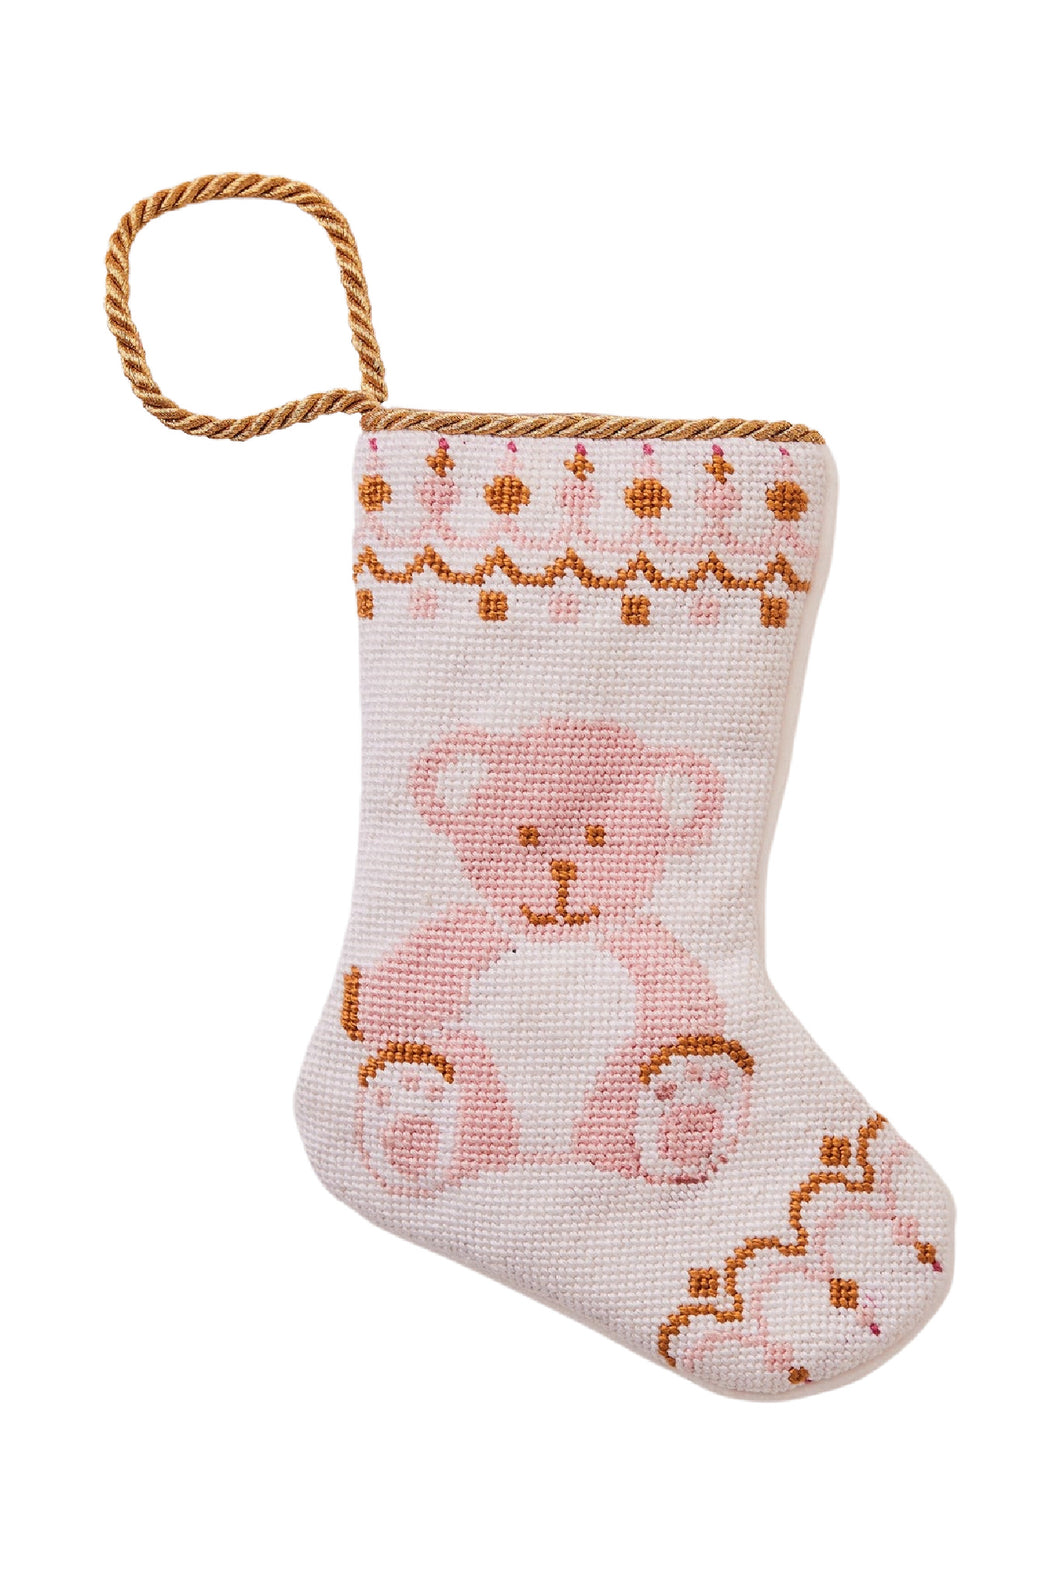 Bear-y Christmas in Pink by Shuler Studio Bauble Stocking